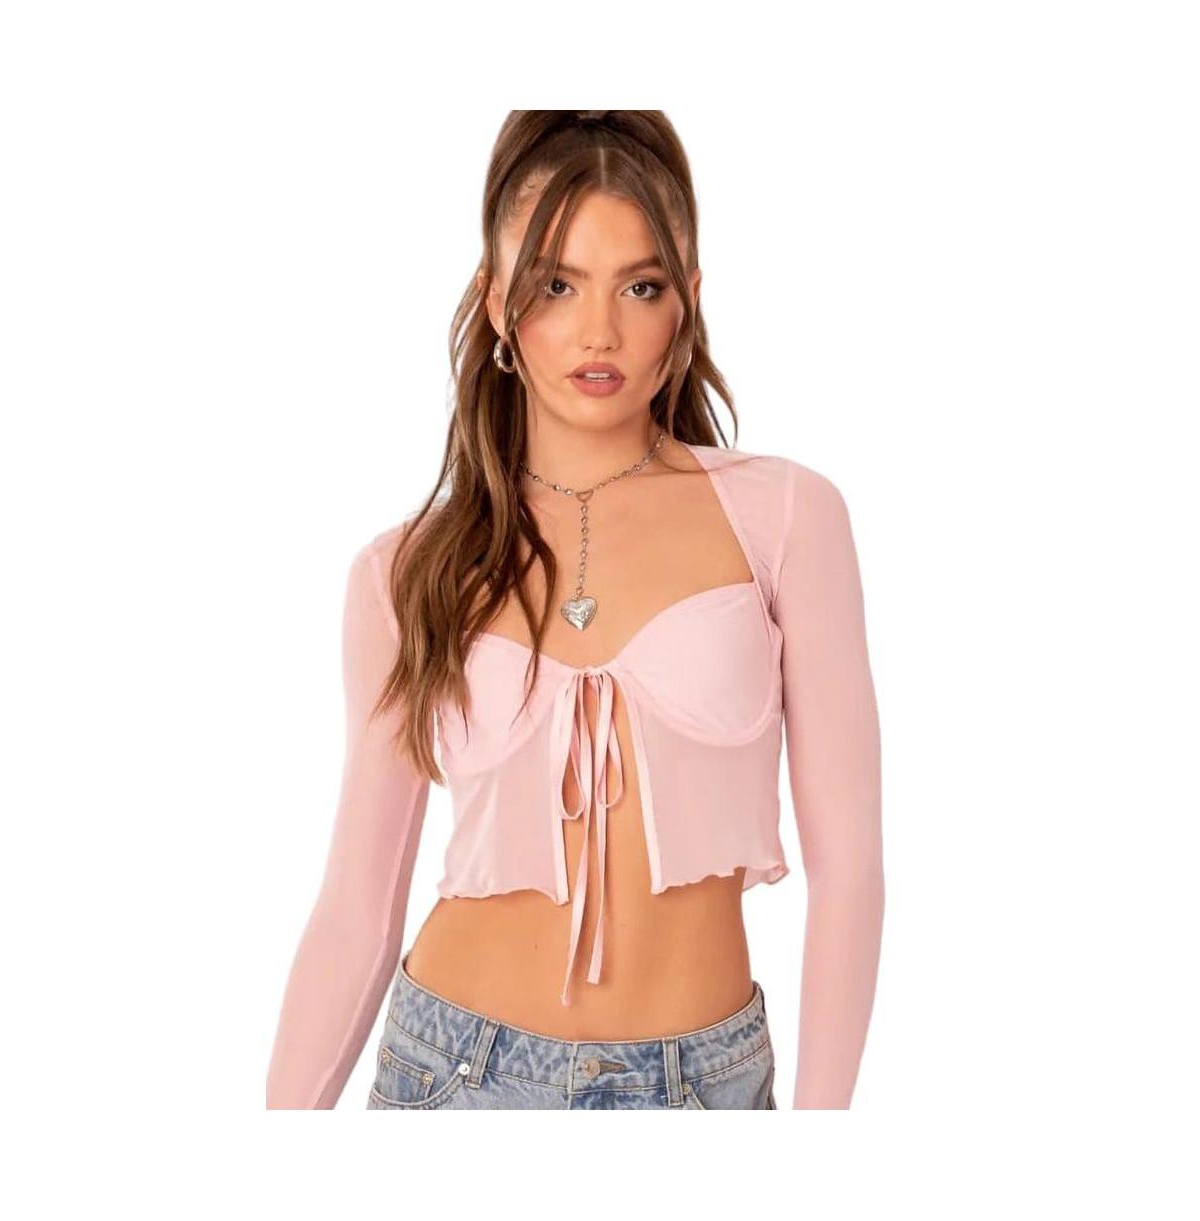 Women's Long Sleeve Mesh Top With Cups & Tie At Front - Light-pink